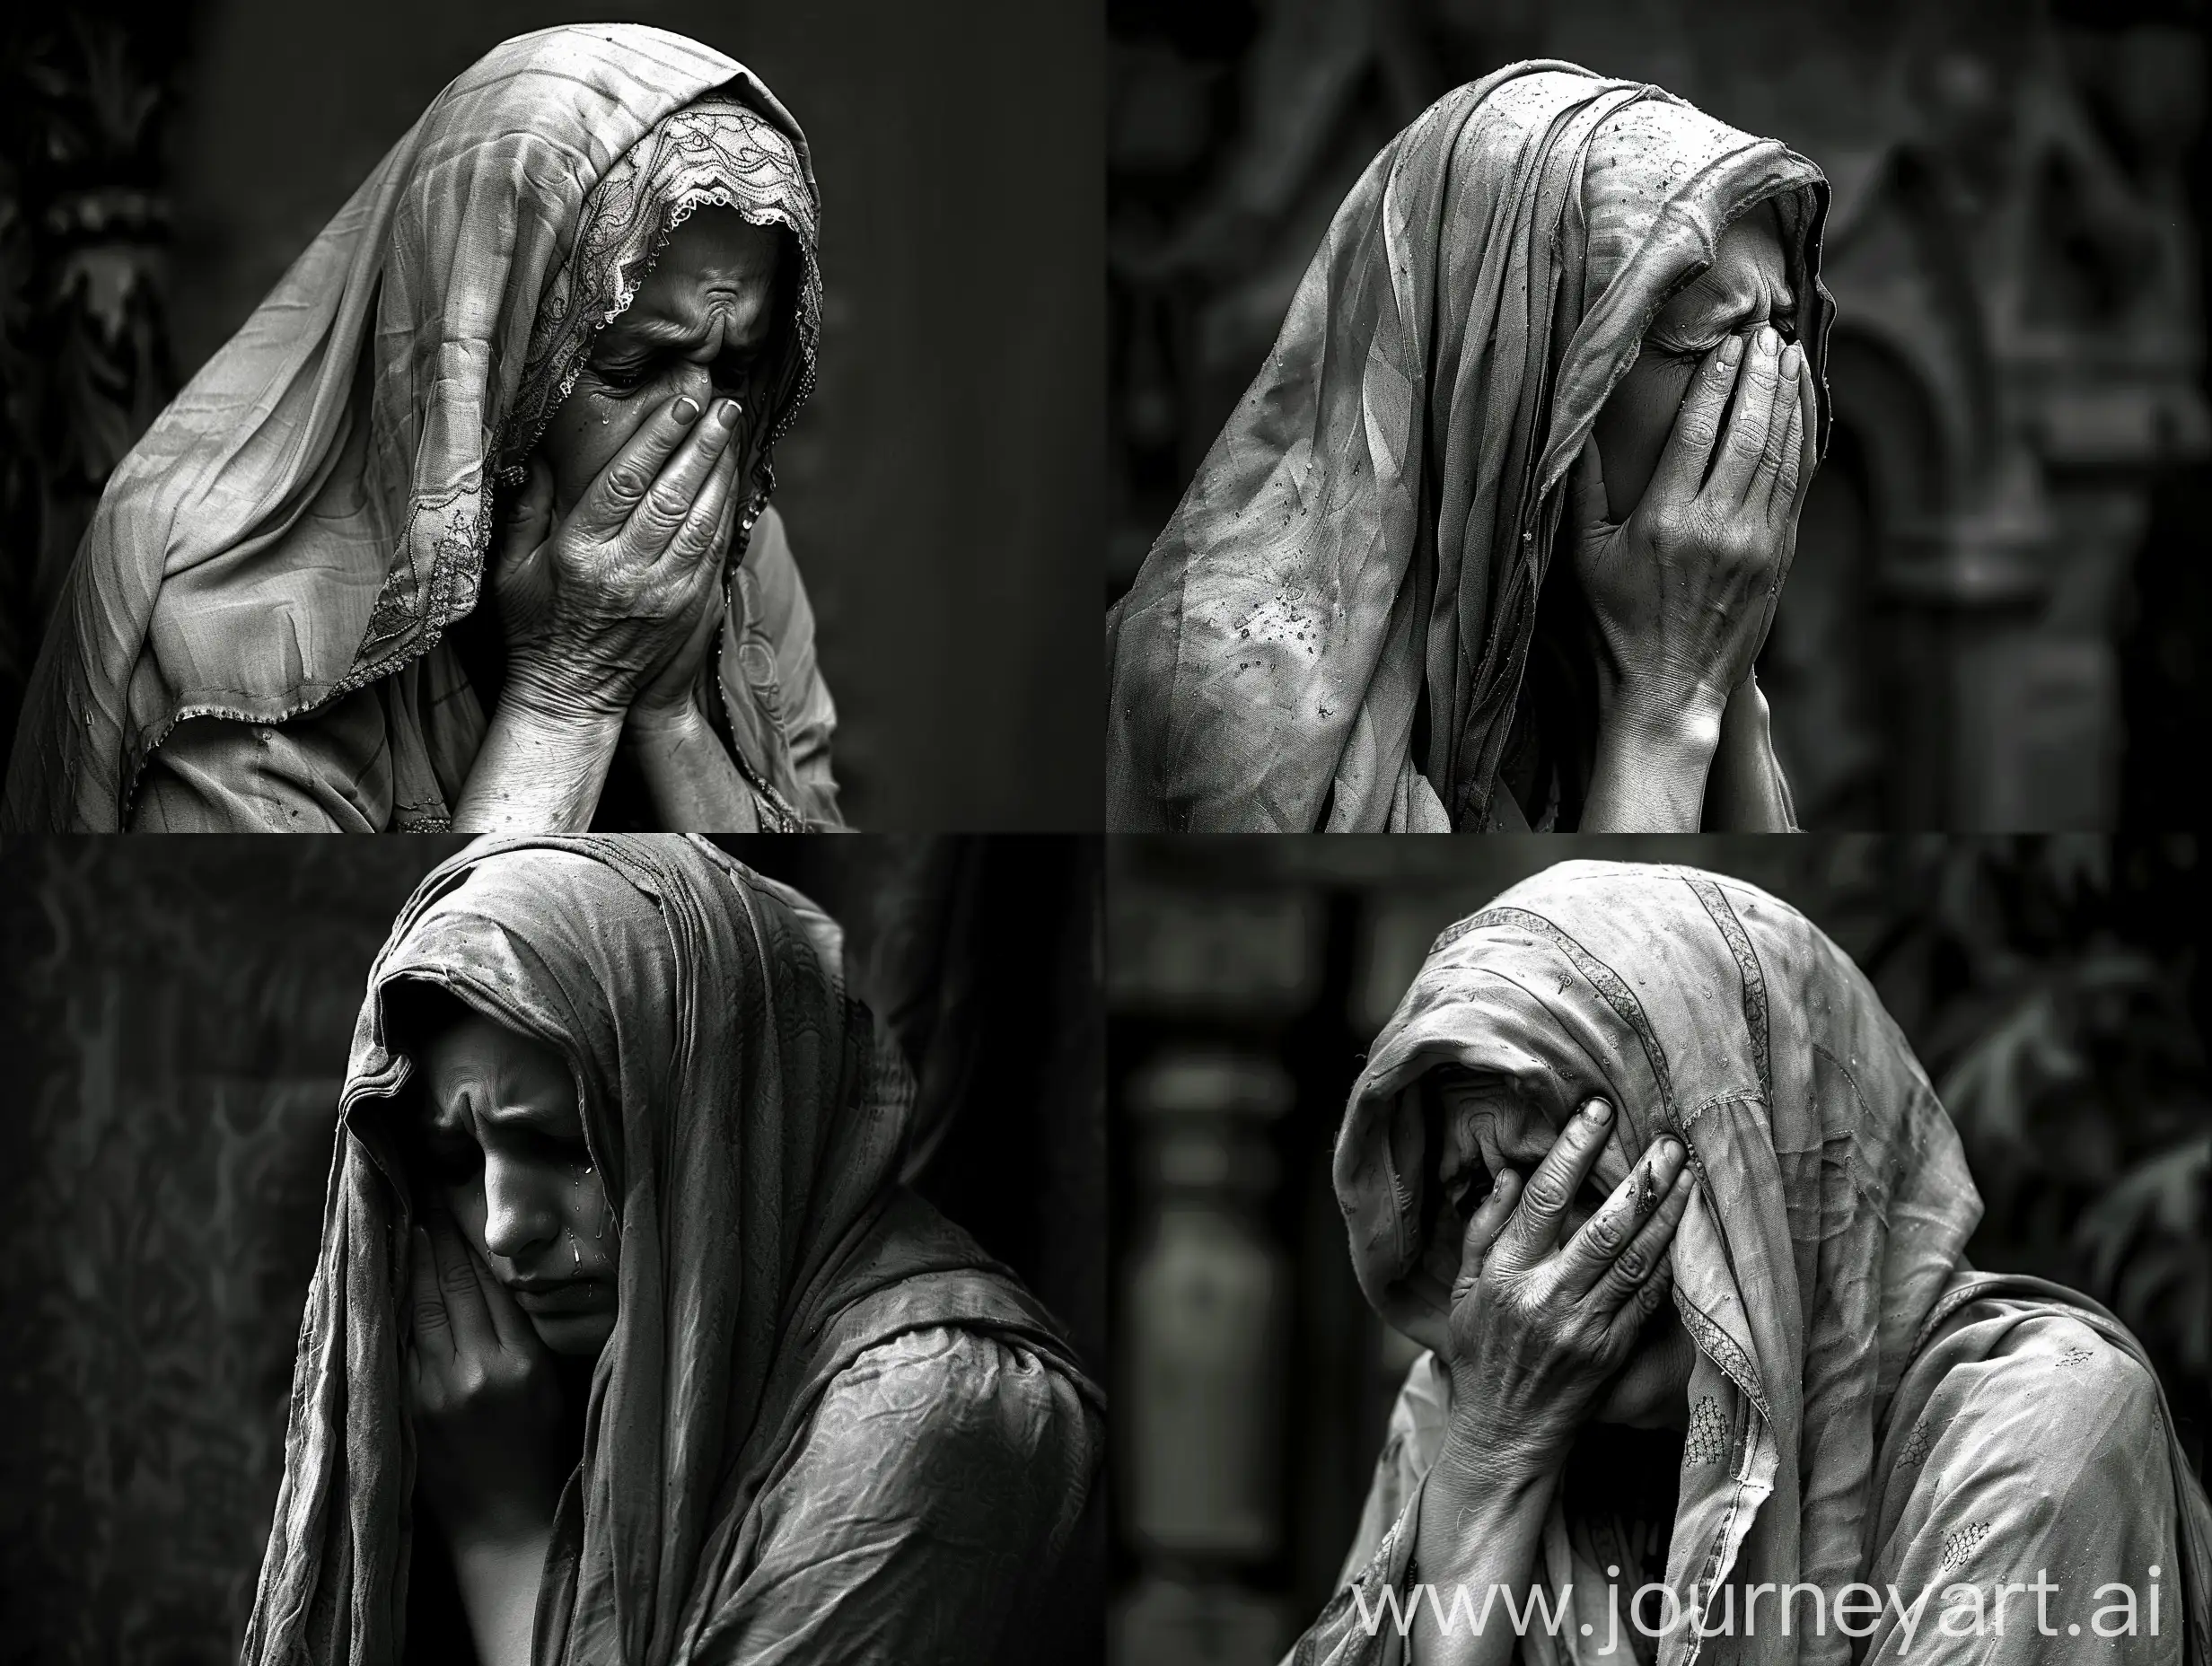 Woman-Mourning-in-Headscarf-Expressive-Black-and-White-Portrait